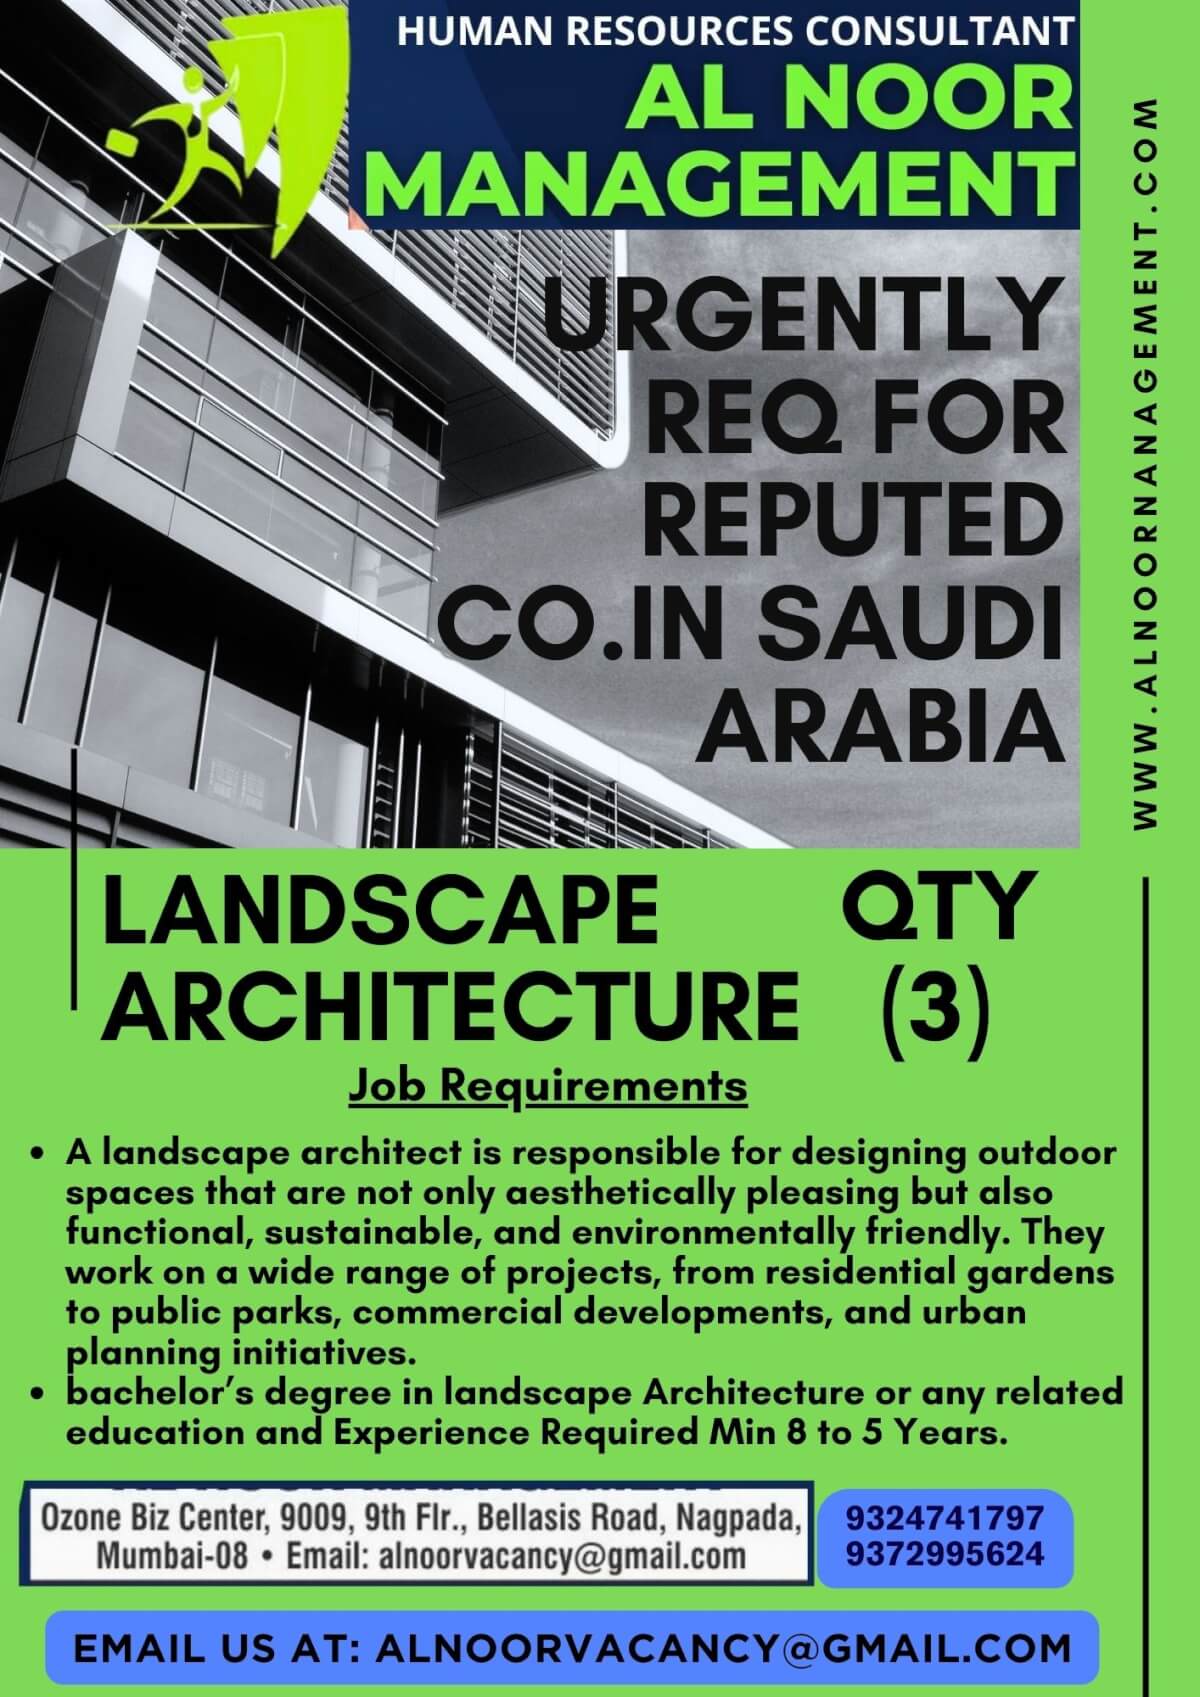 Urgently Required for LANDSCAPE ARCHITECTURE for Reputed Company in Saudi Arabia KSA